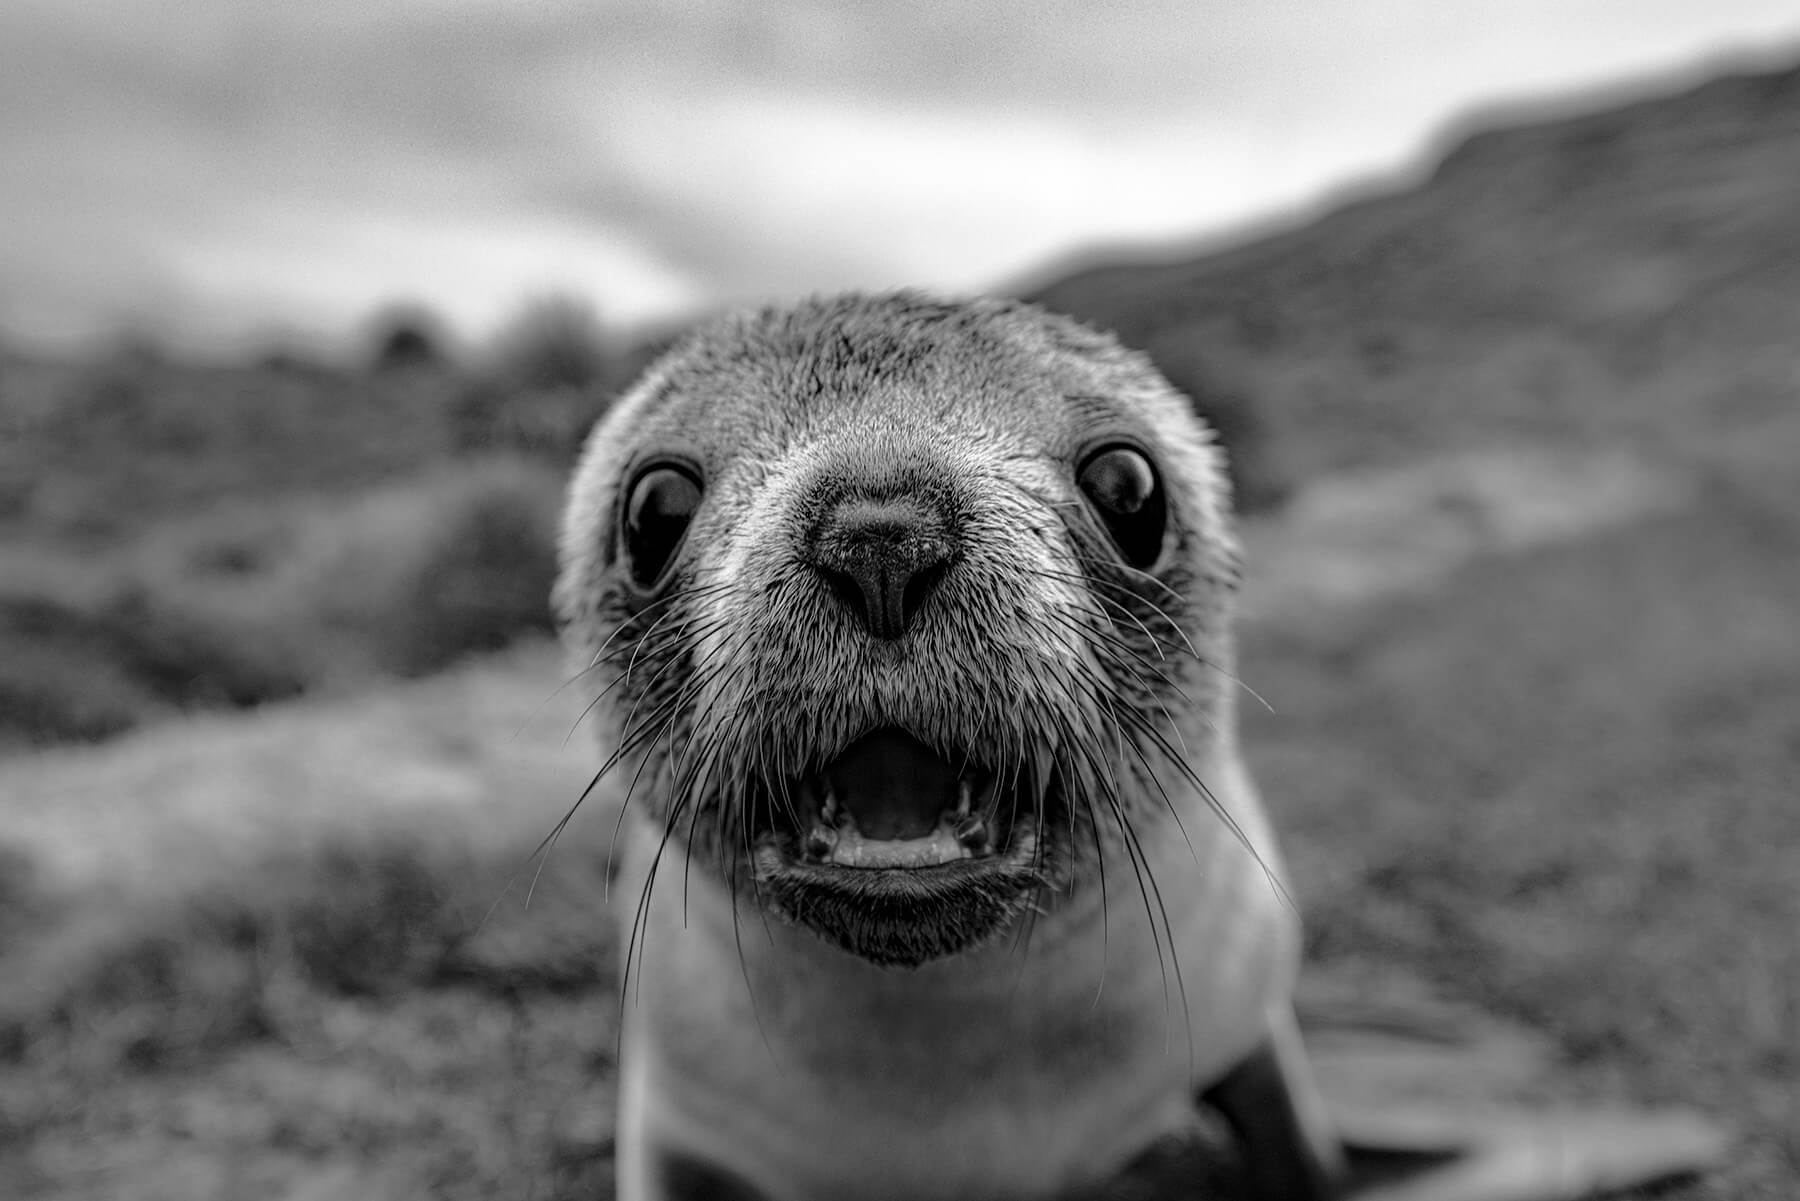 This Antarctic Fur seal may have been startled by the photographer’s lens. Photographer: Artem Shestakov. Location: Antarctica.